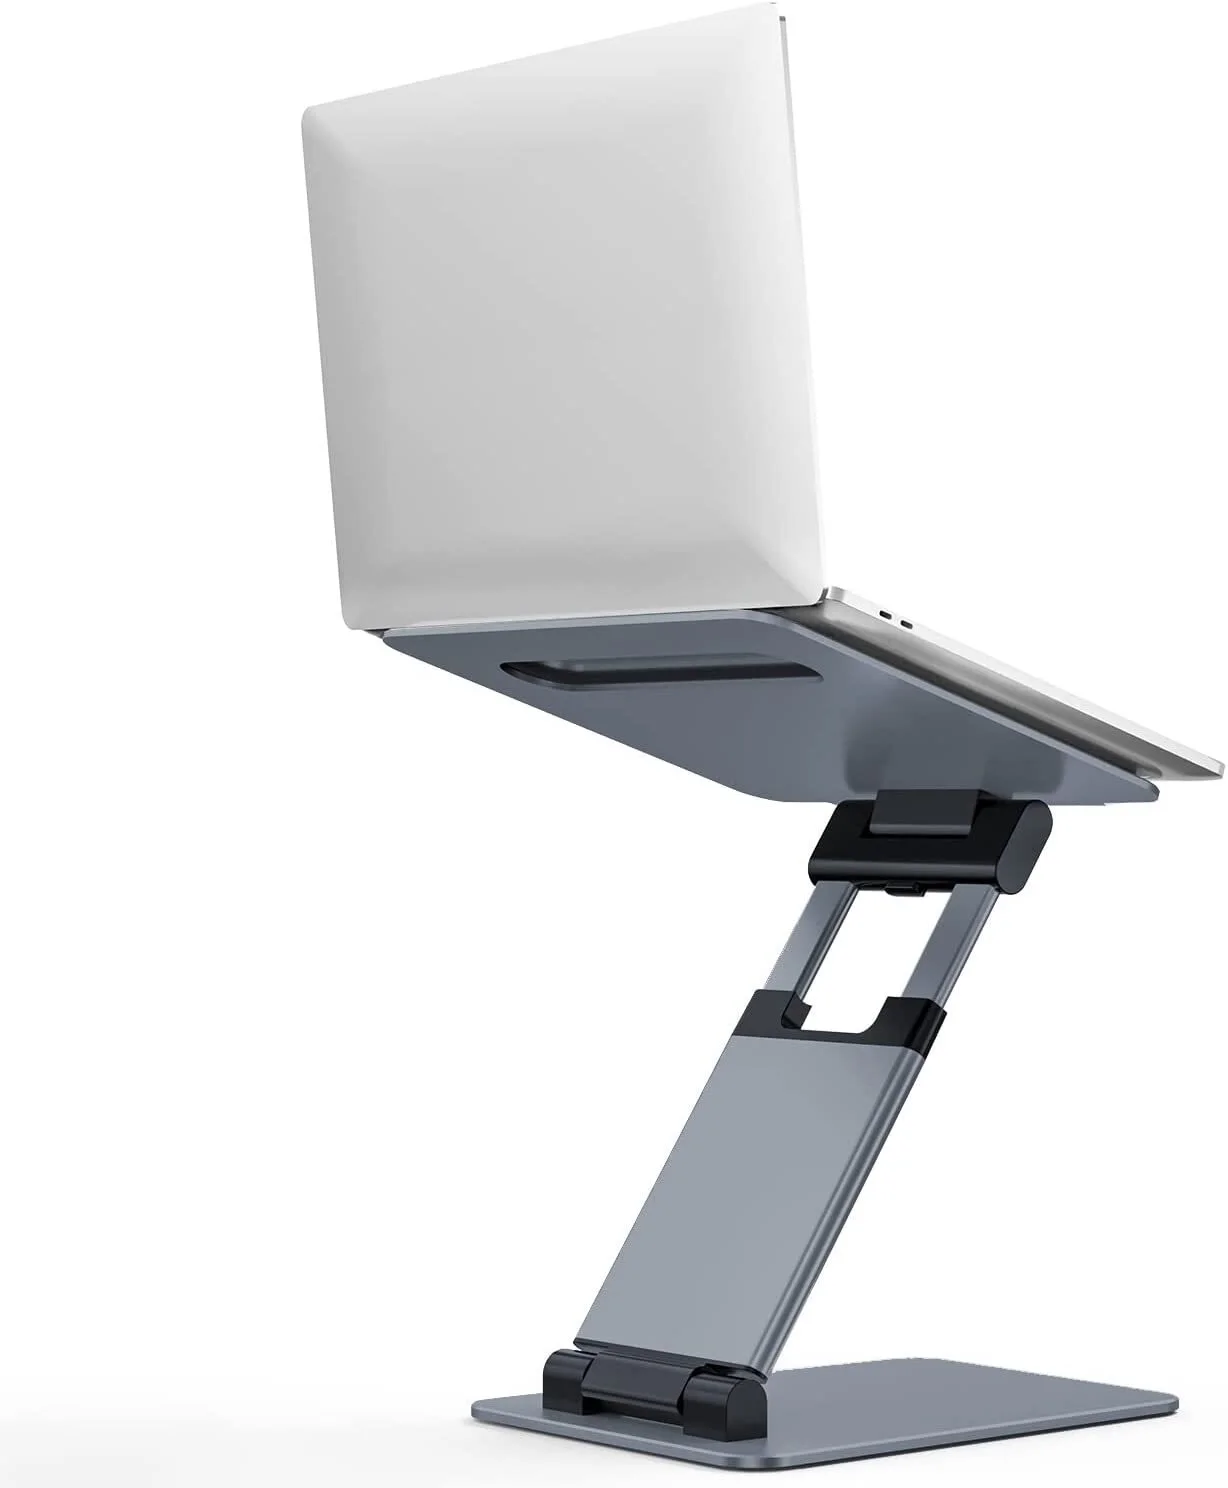 Enlarge Laptop Stand, DUCHY Ergonomic Laptop Riser Computer Stand for Laptop,Adjustable Laptop Holder Height from 2.1